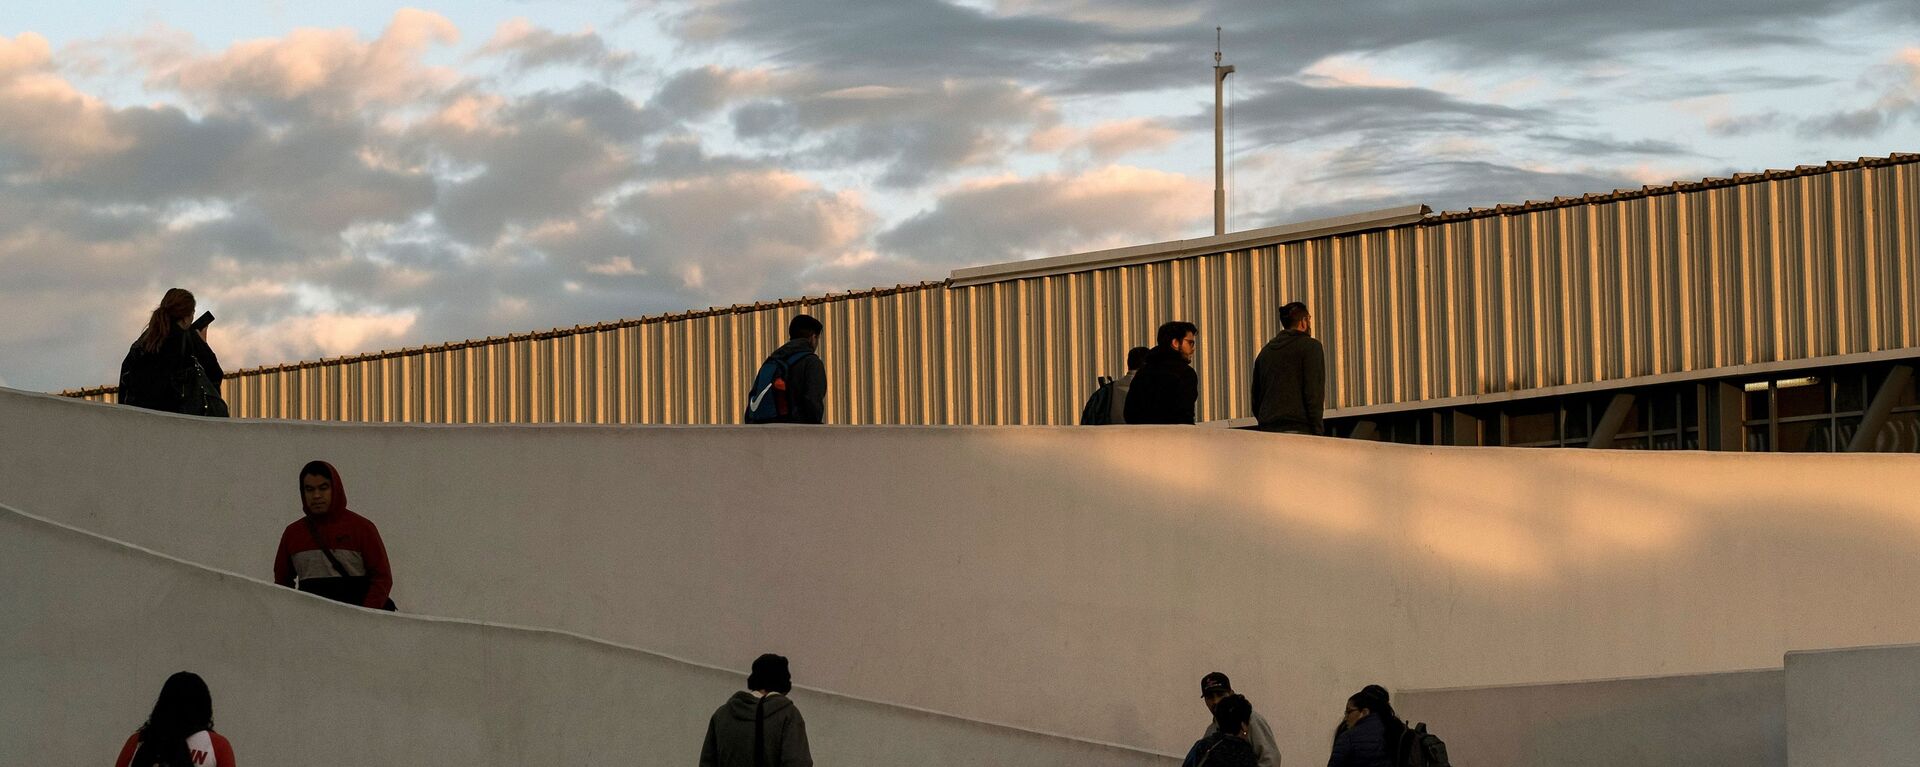 People walk towards to the United States at El Chaparral crossing port on the US/Mexico Border in Tijuana, Baja California state, Mexico, on February 29, 2020 - Sputnik International, 1920, 12.03.2020